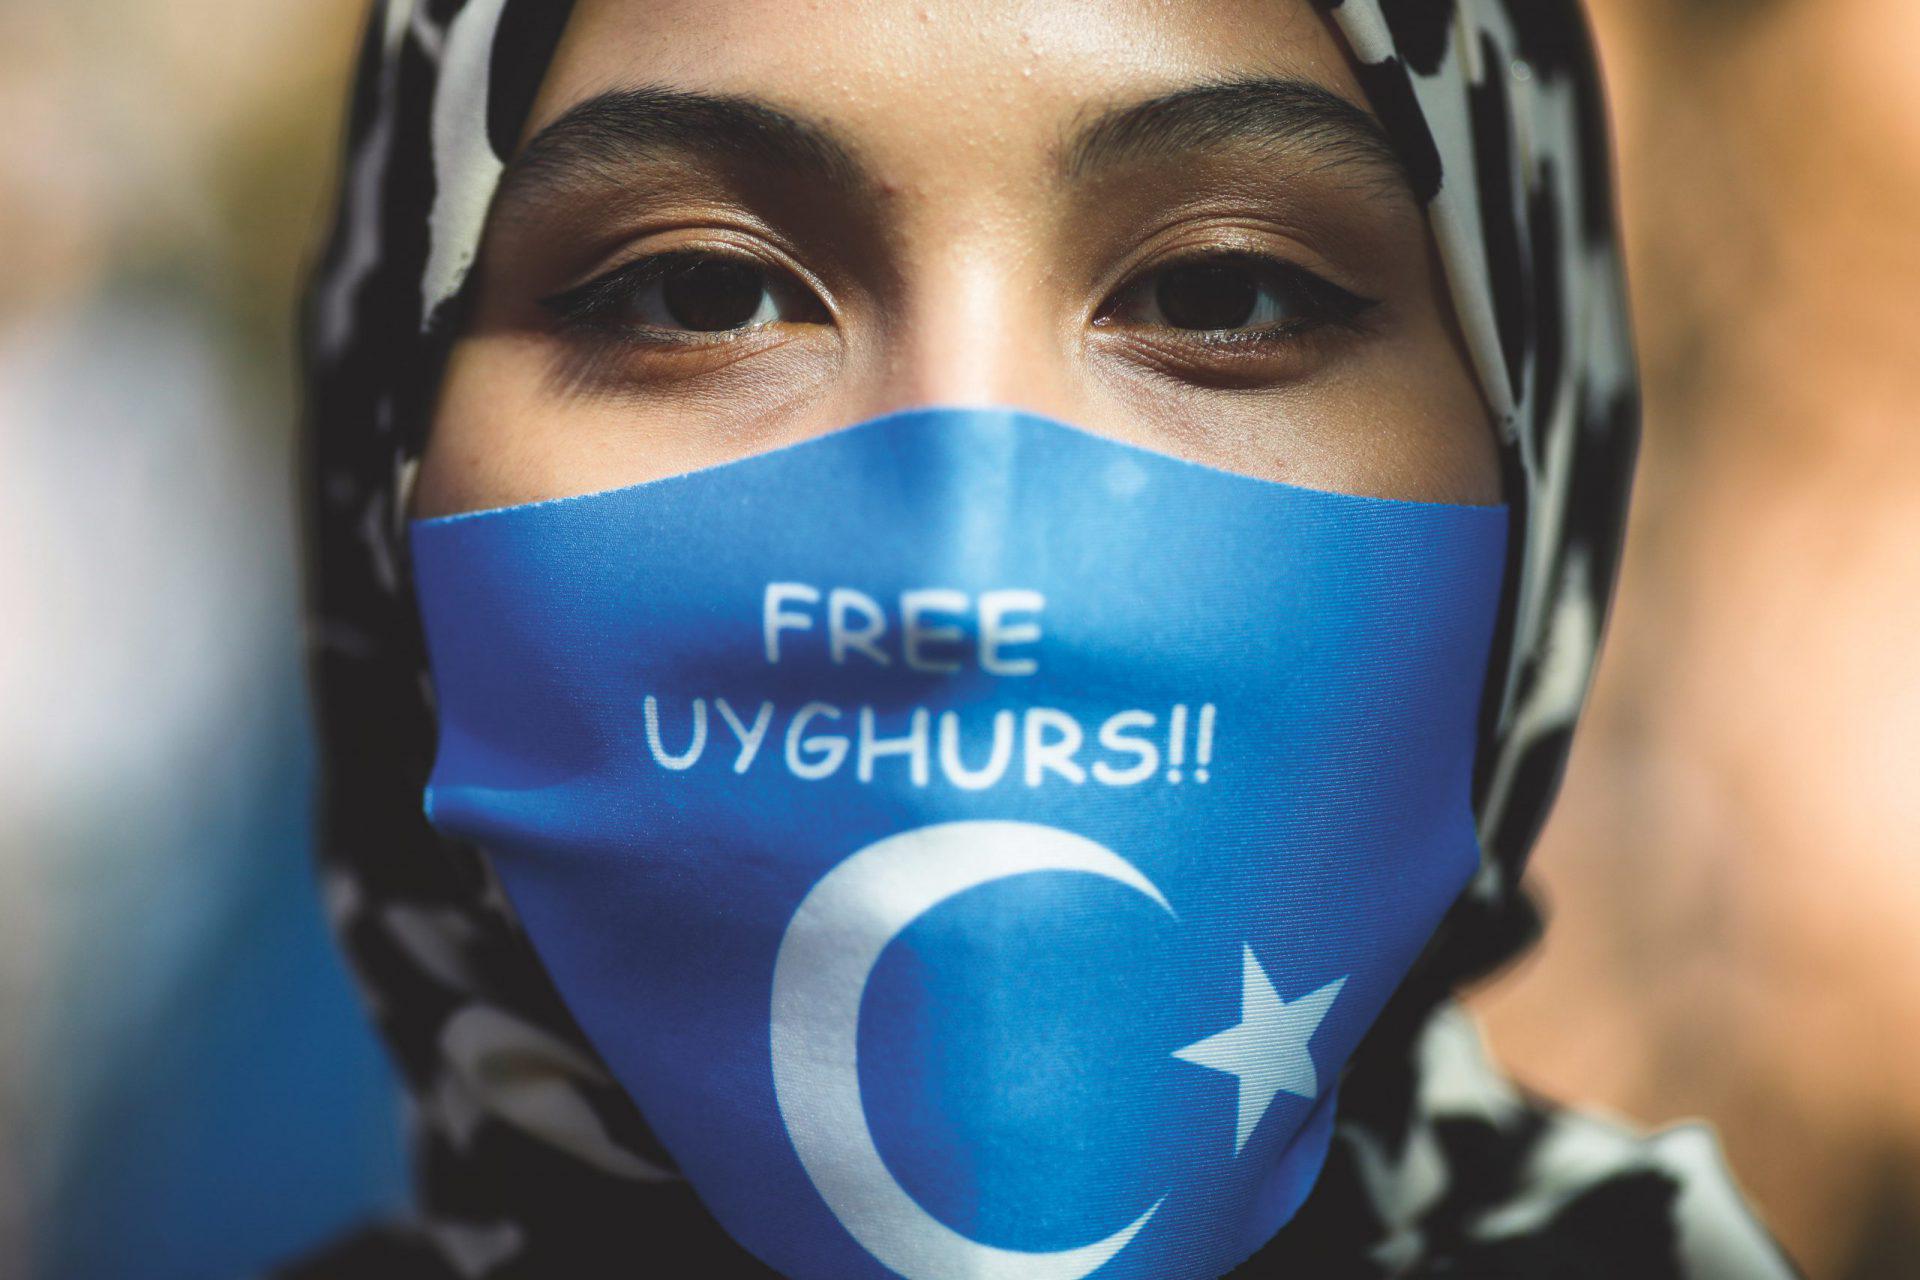 World Uyghur Congress calls for global action against China’s human rights abuses